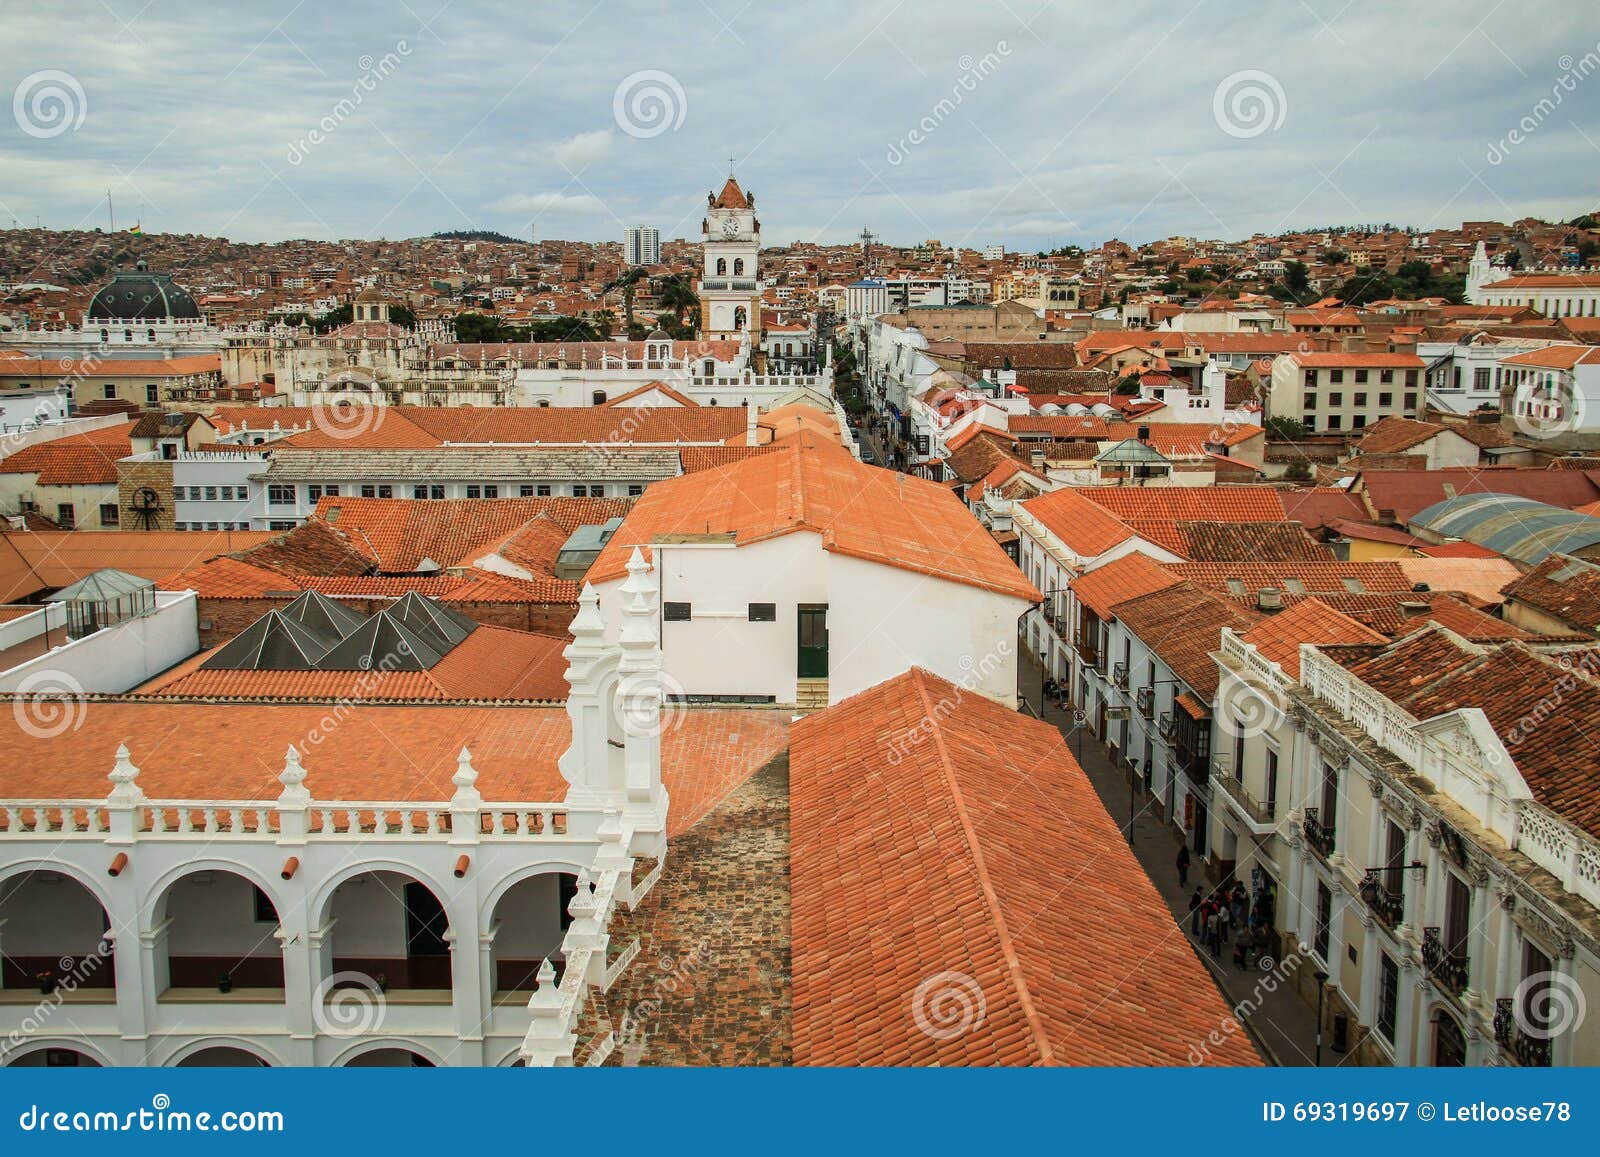 view over the rooftop of sucre, oropeza province, bolivia